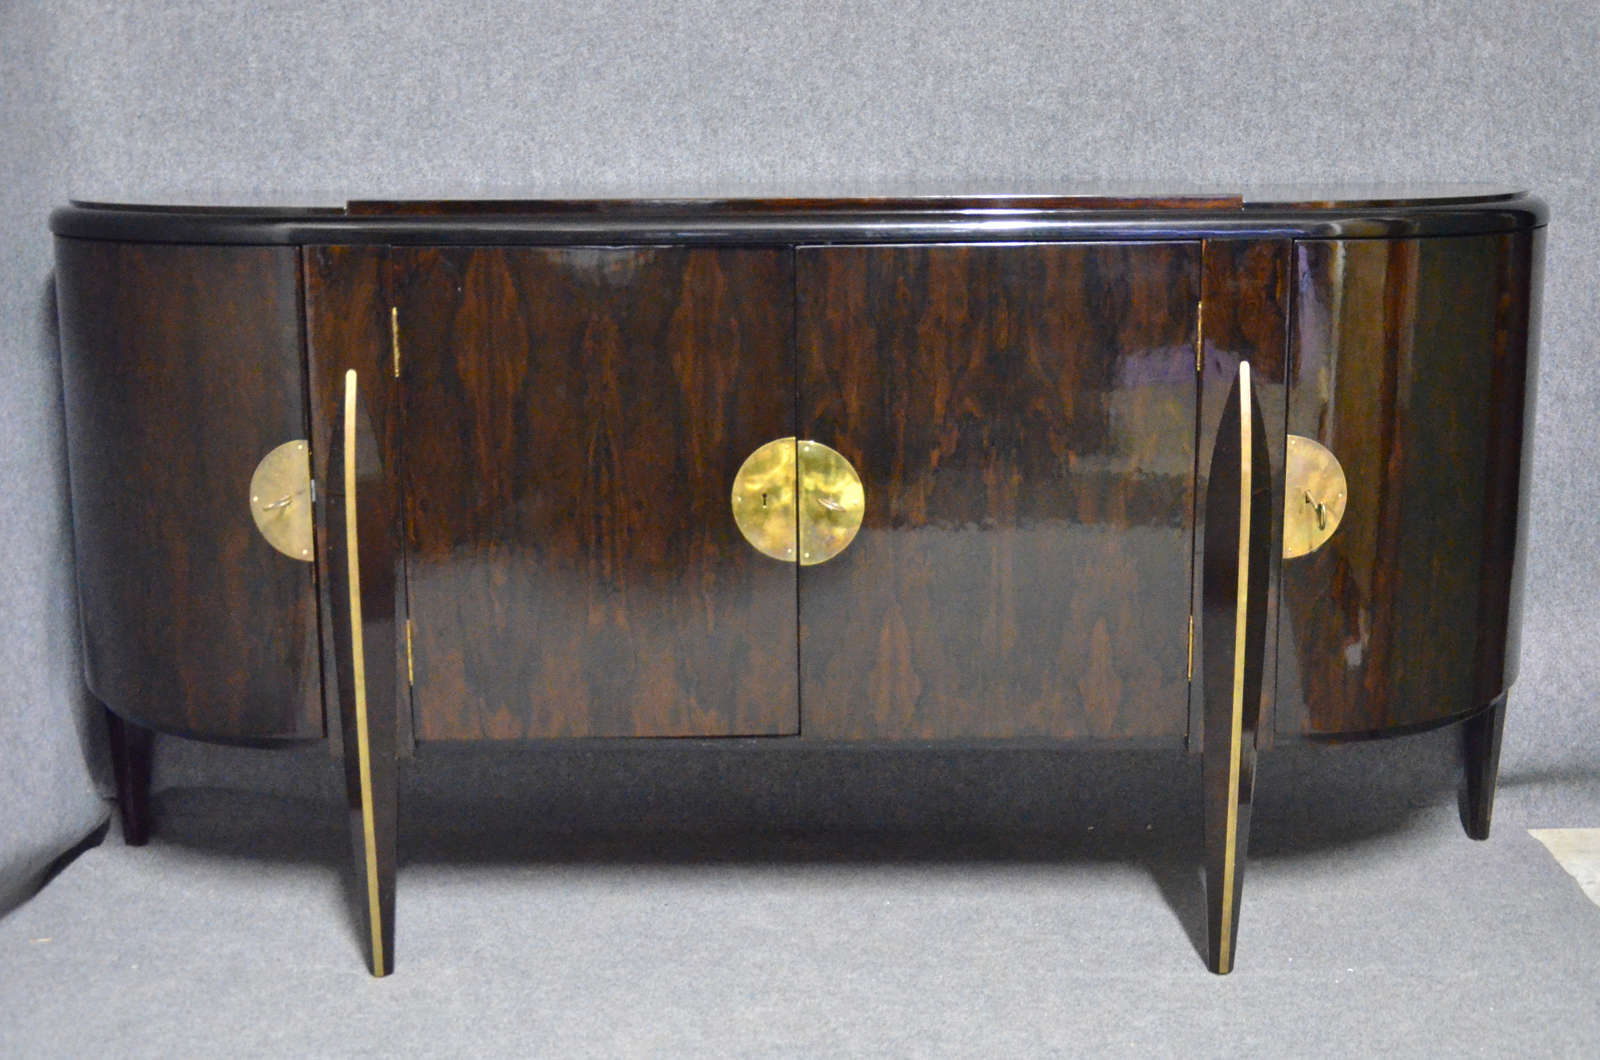 Important sideboard to demi - lune, embellished by singular decorations in brass. Finished very well inside.
Connected to SMALL DEMI - LUNE SIDEBOARD 121203952829